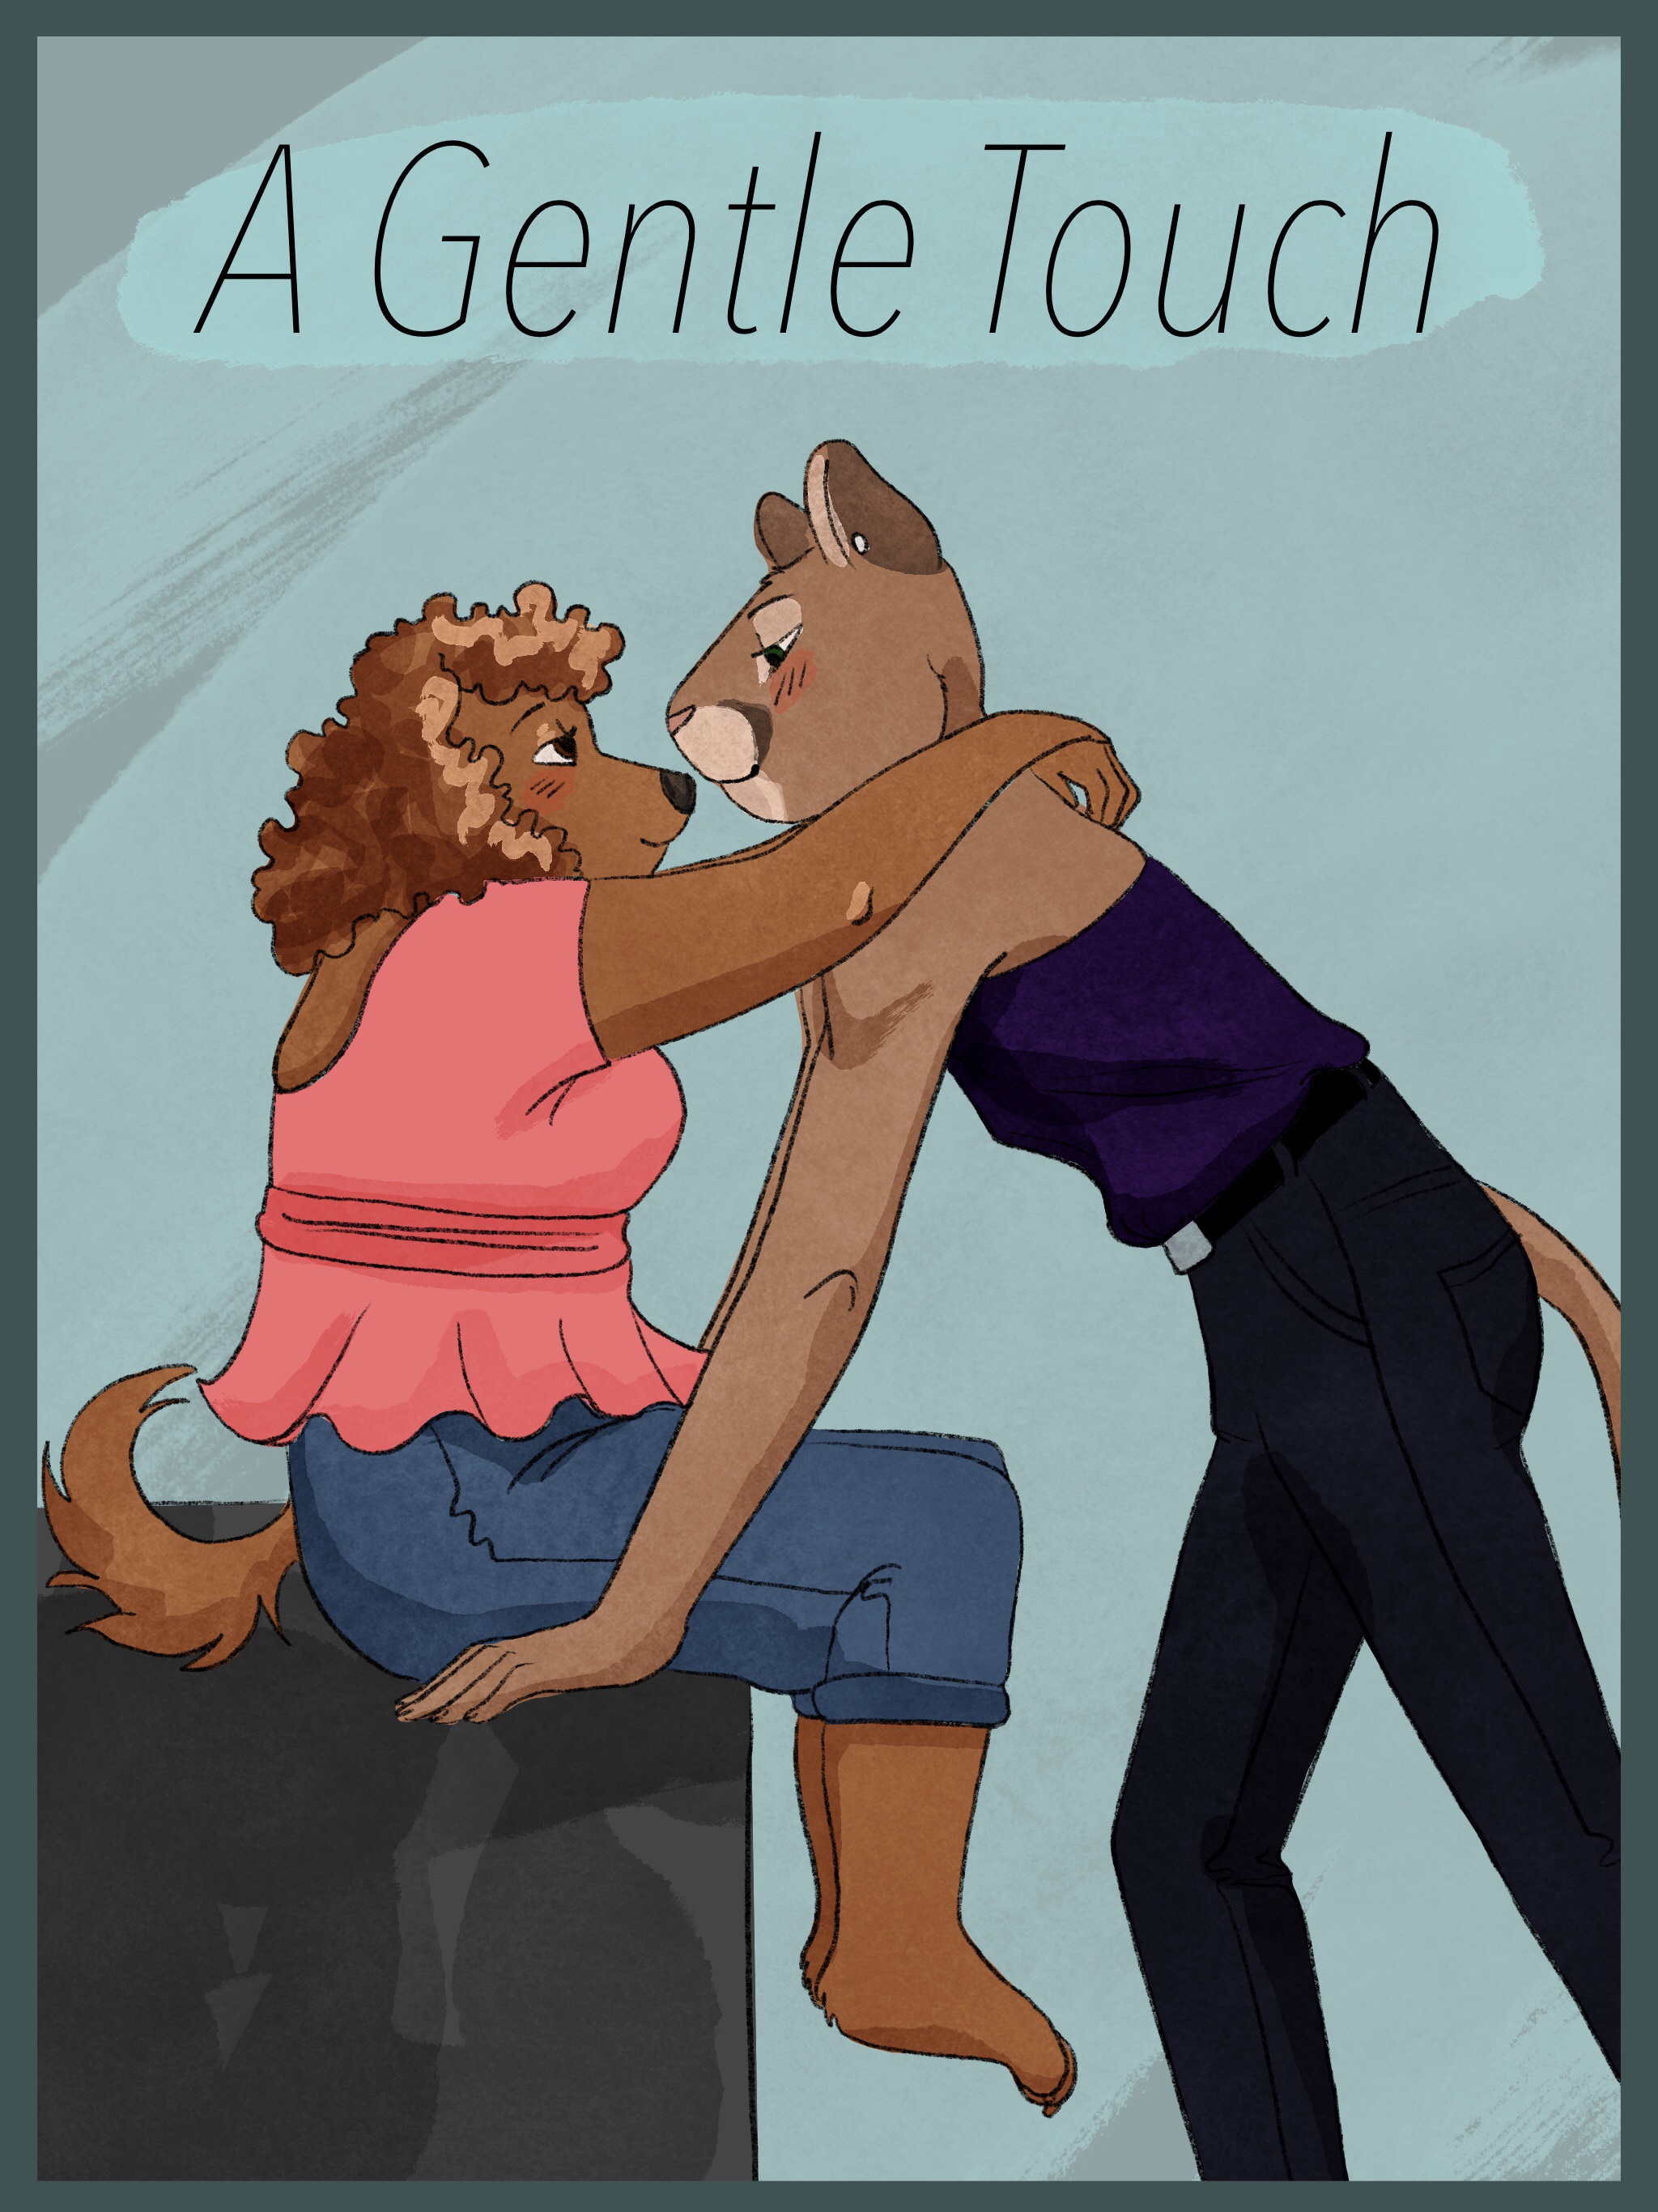 A gentle touch comic